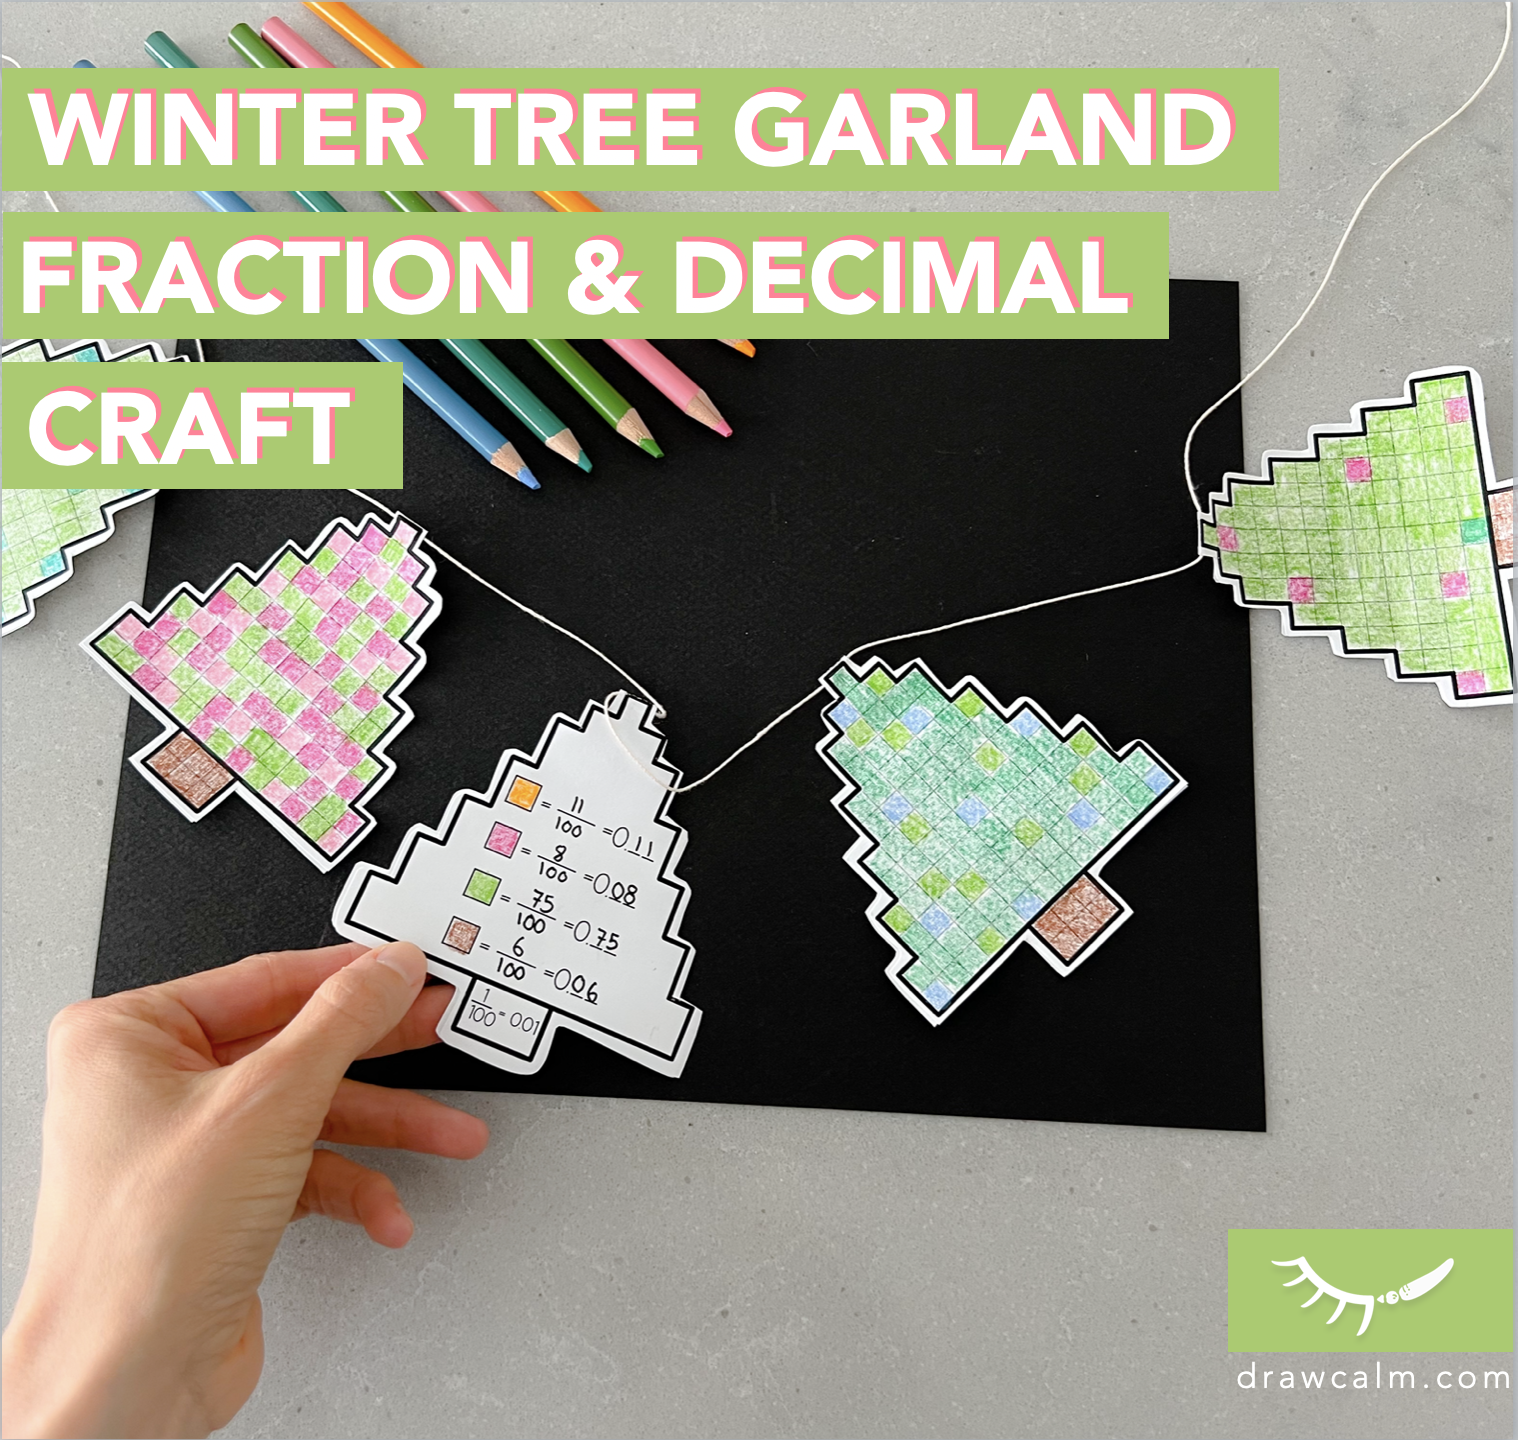 Printable christmas math activity of a paper garland of winter trees divided into 100 squares. The front of the tree is a grid and the back shows fractions and decimal values for each color shown on the front.